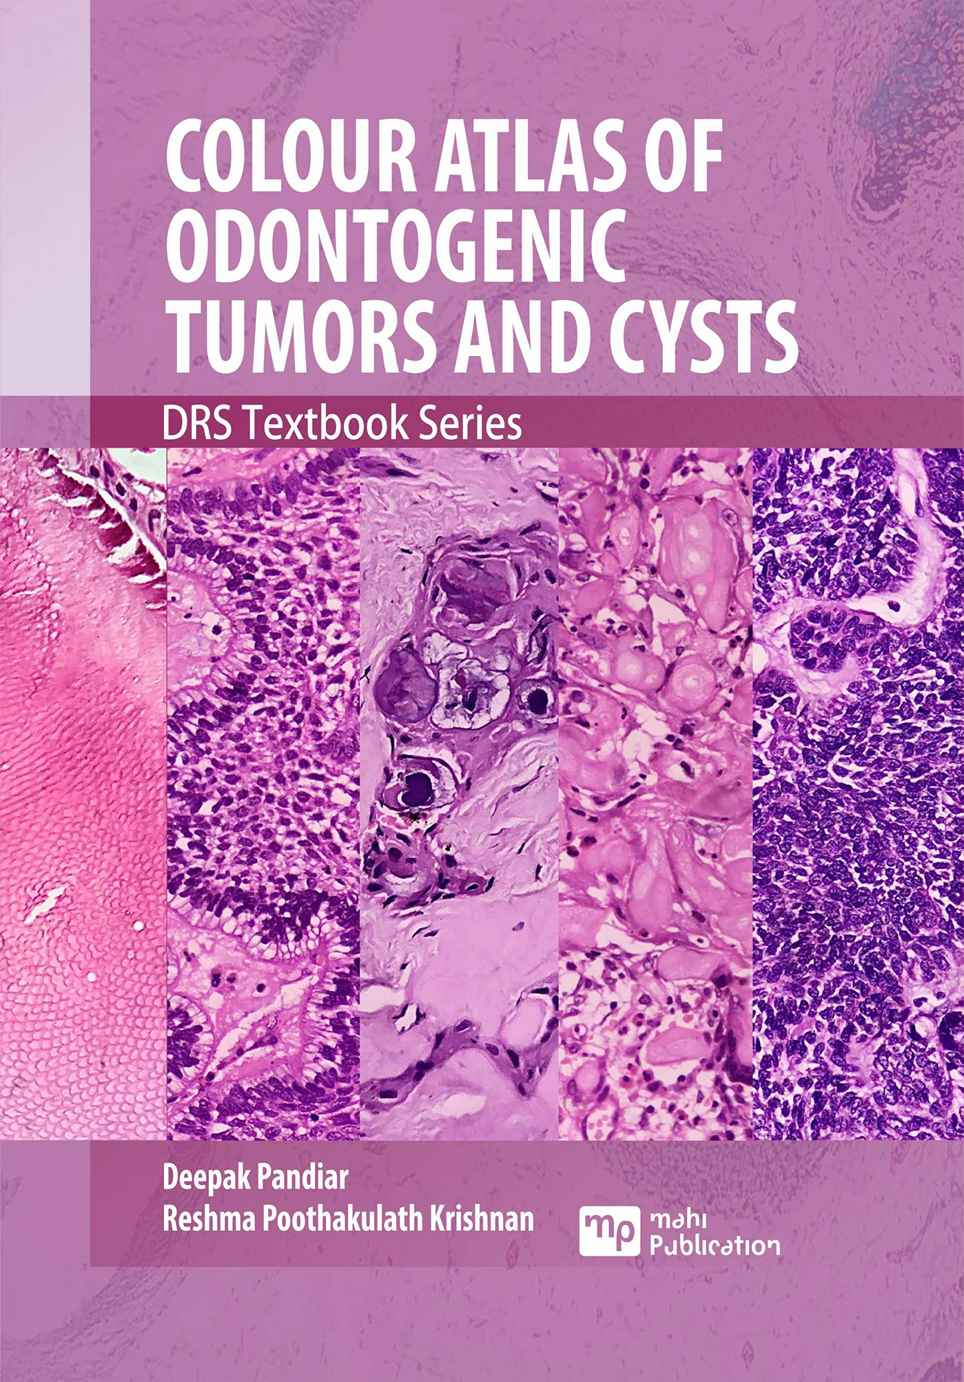 Colour Atlas of Odontogenic Tumors and Cysts DRS Textbook Series